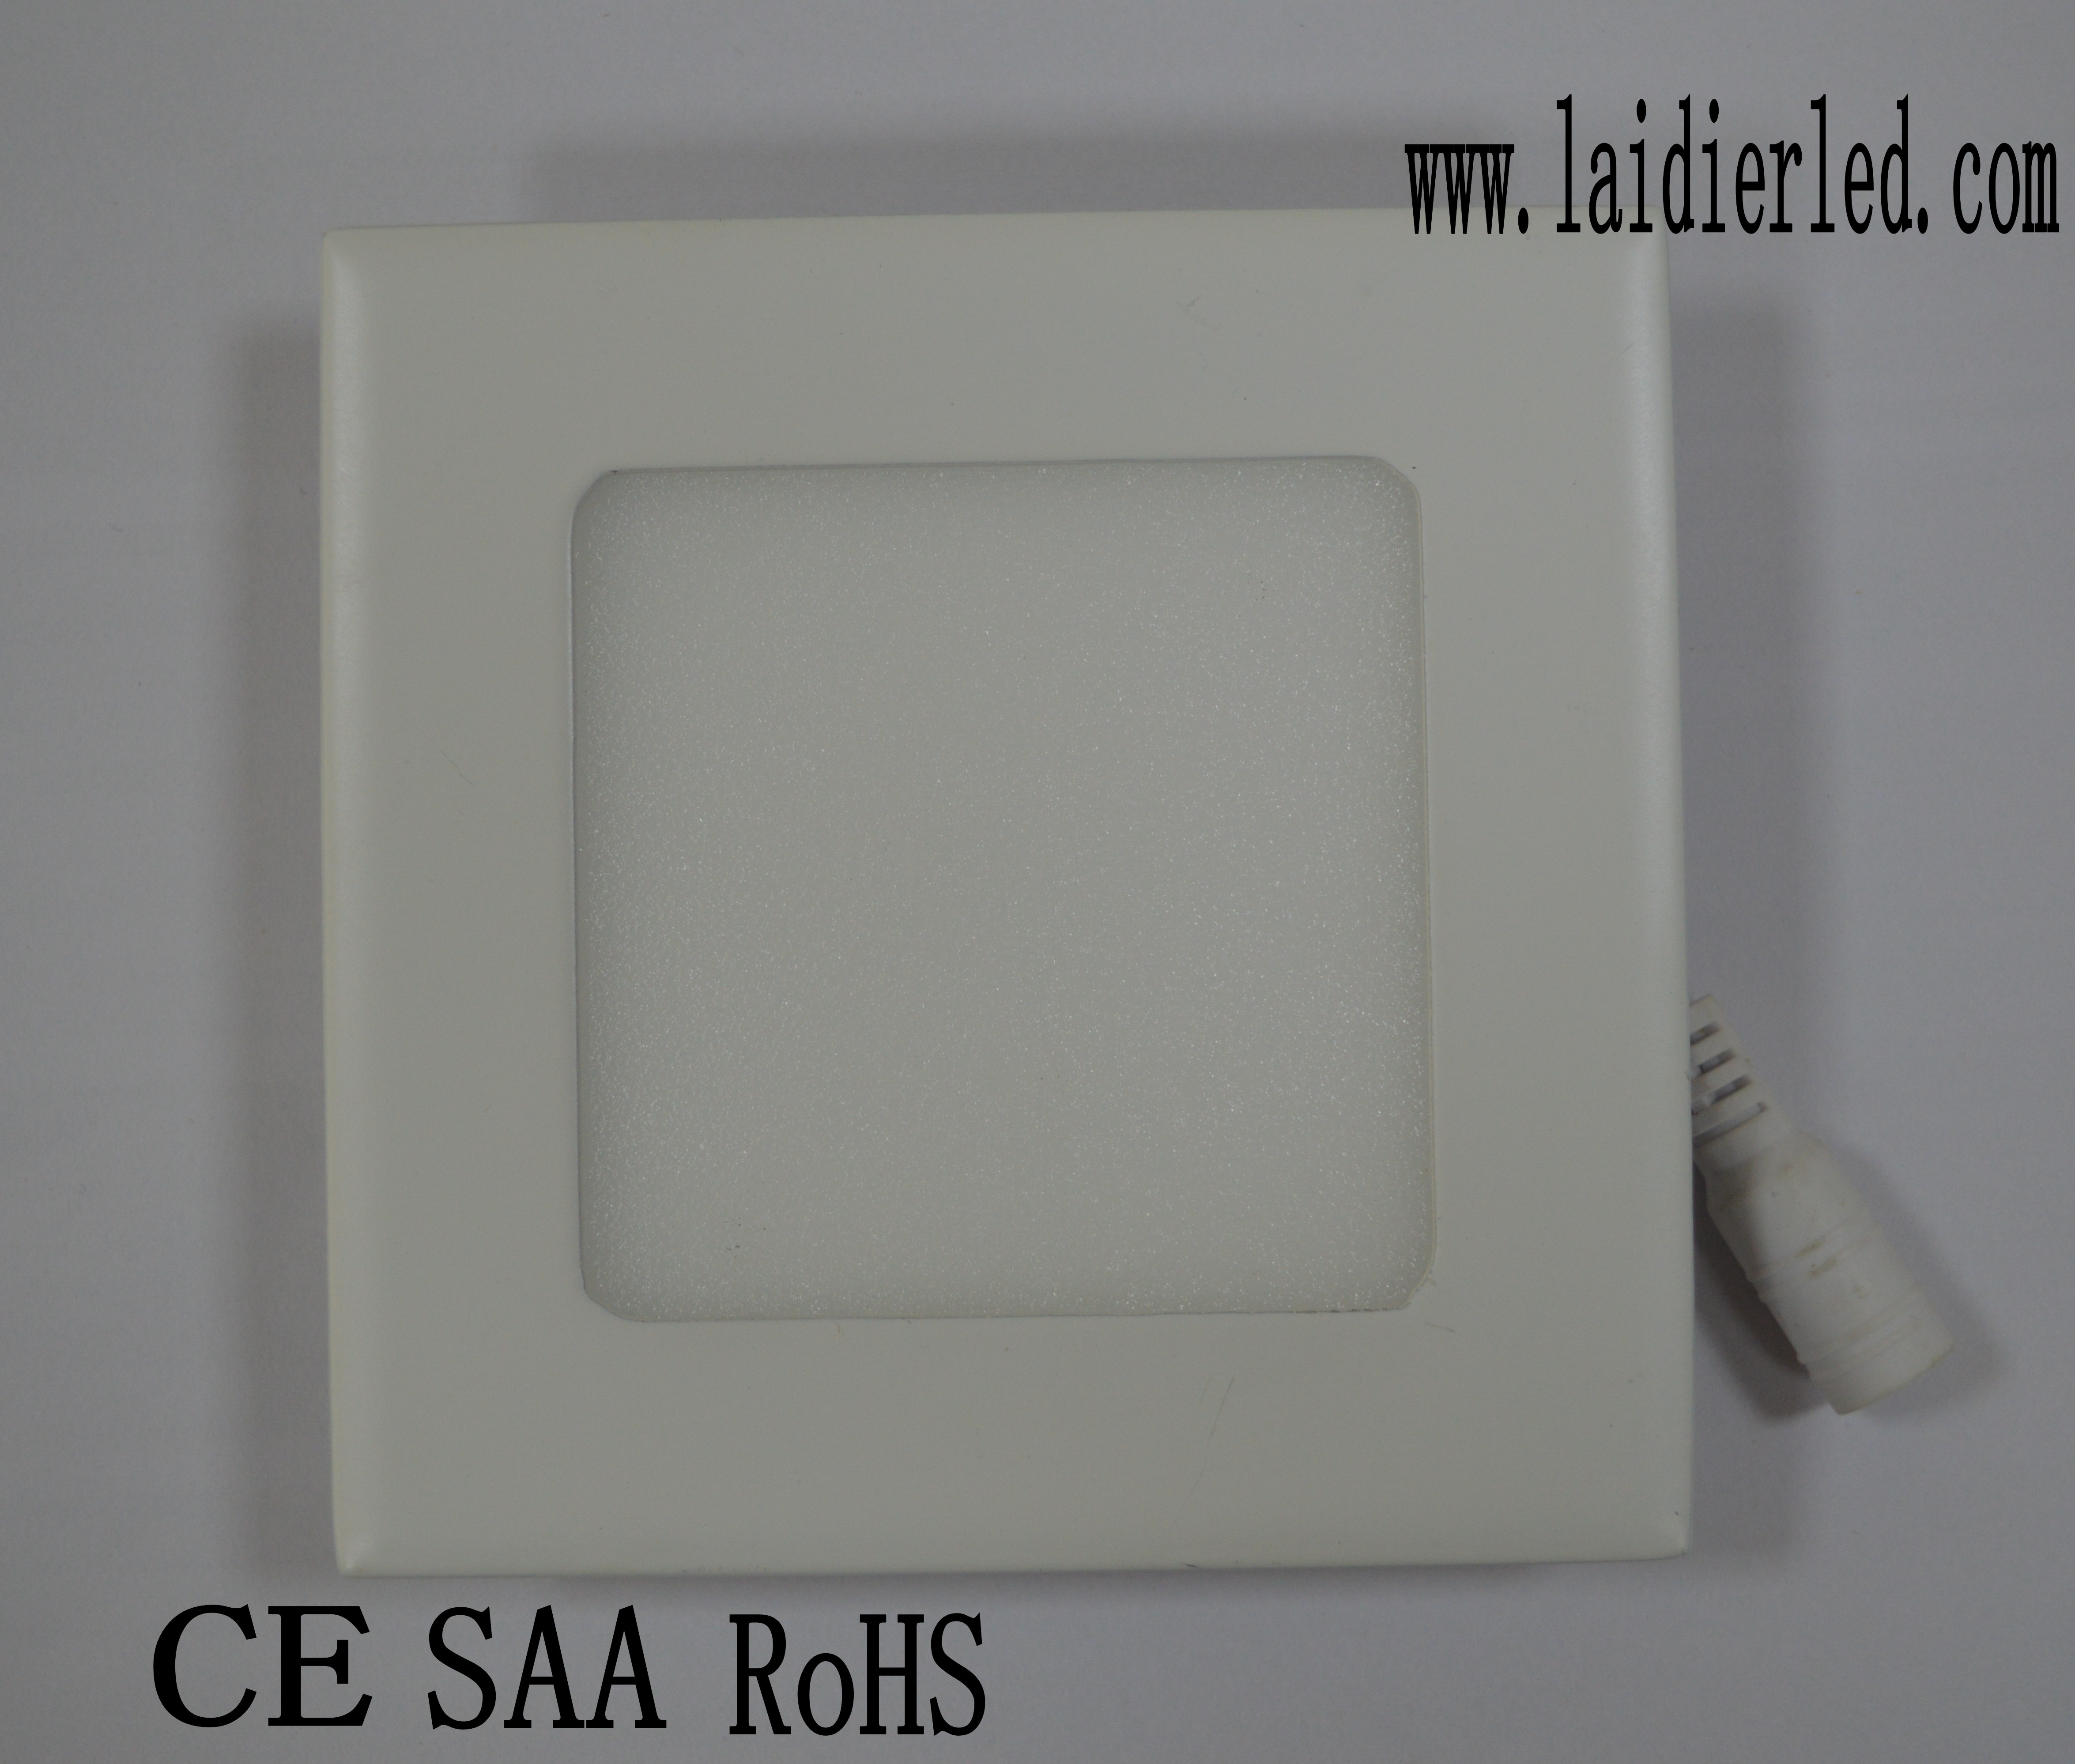 Hot sale high quality LED Panel Light 6W SMD2835 2years warranty